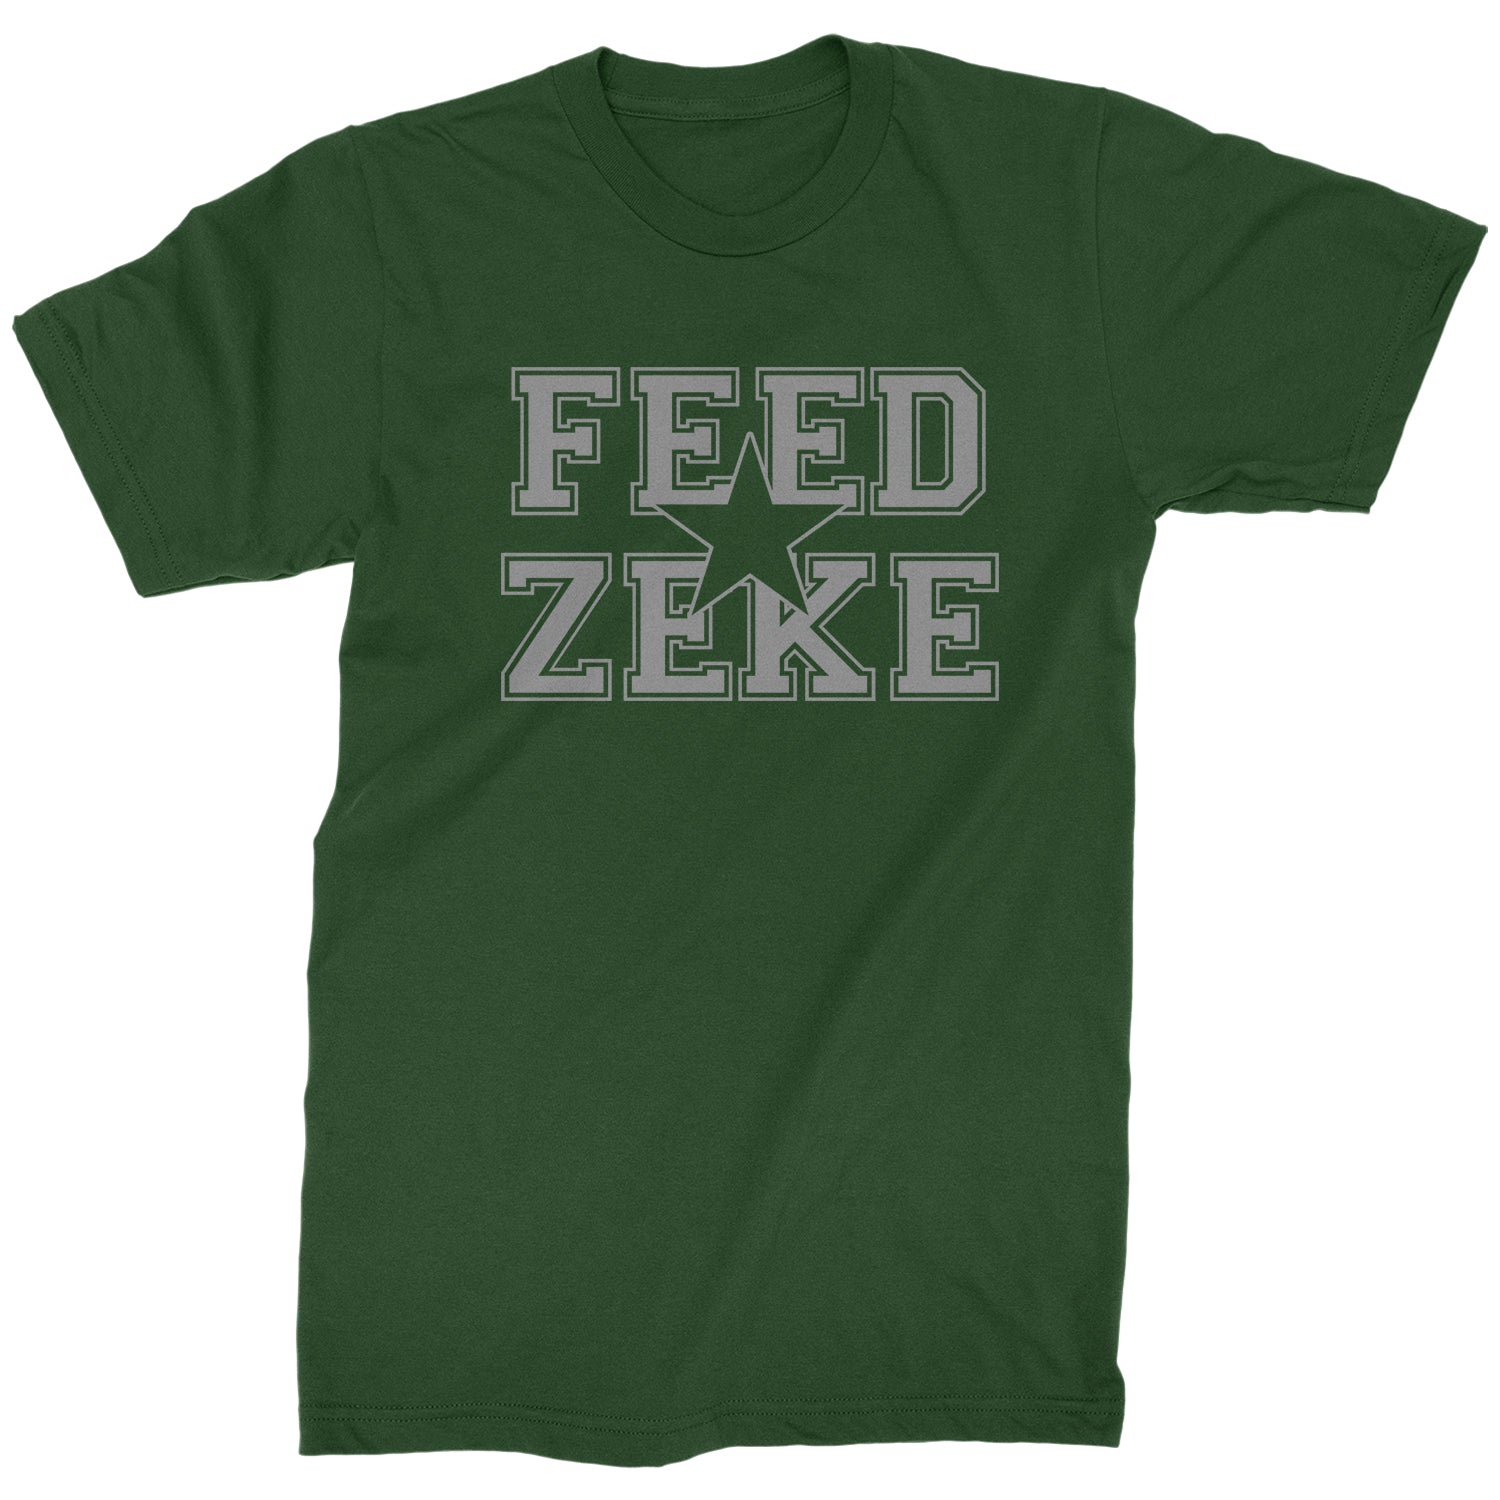 Feed Zeke Mens T-shirt #expressiontees by Expression Tees